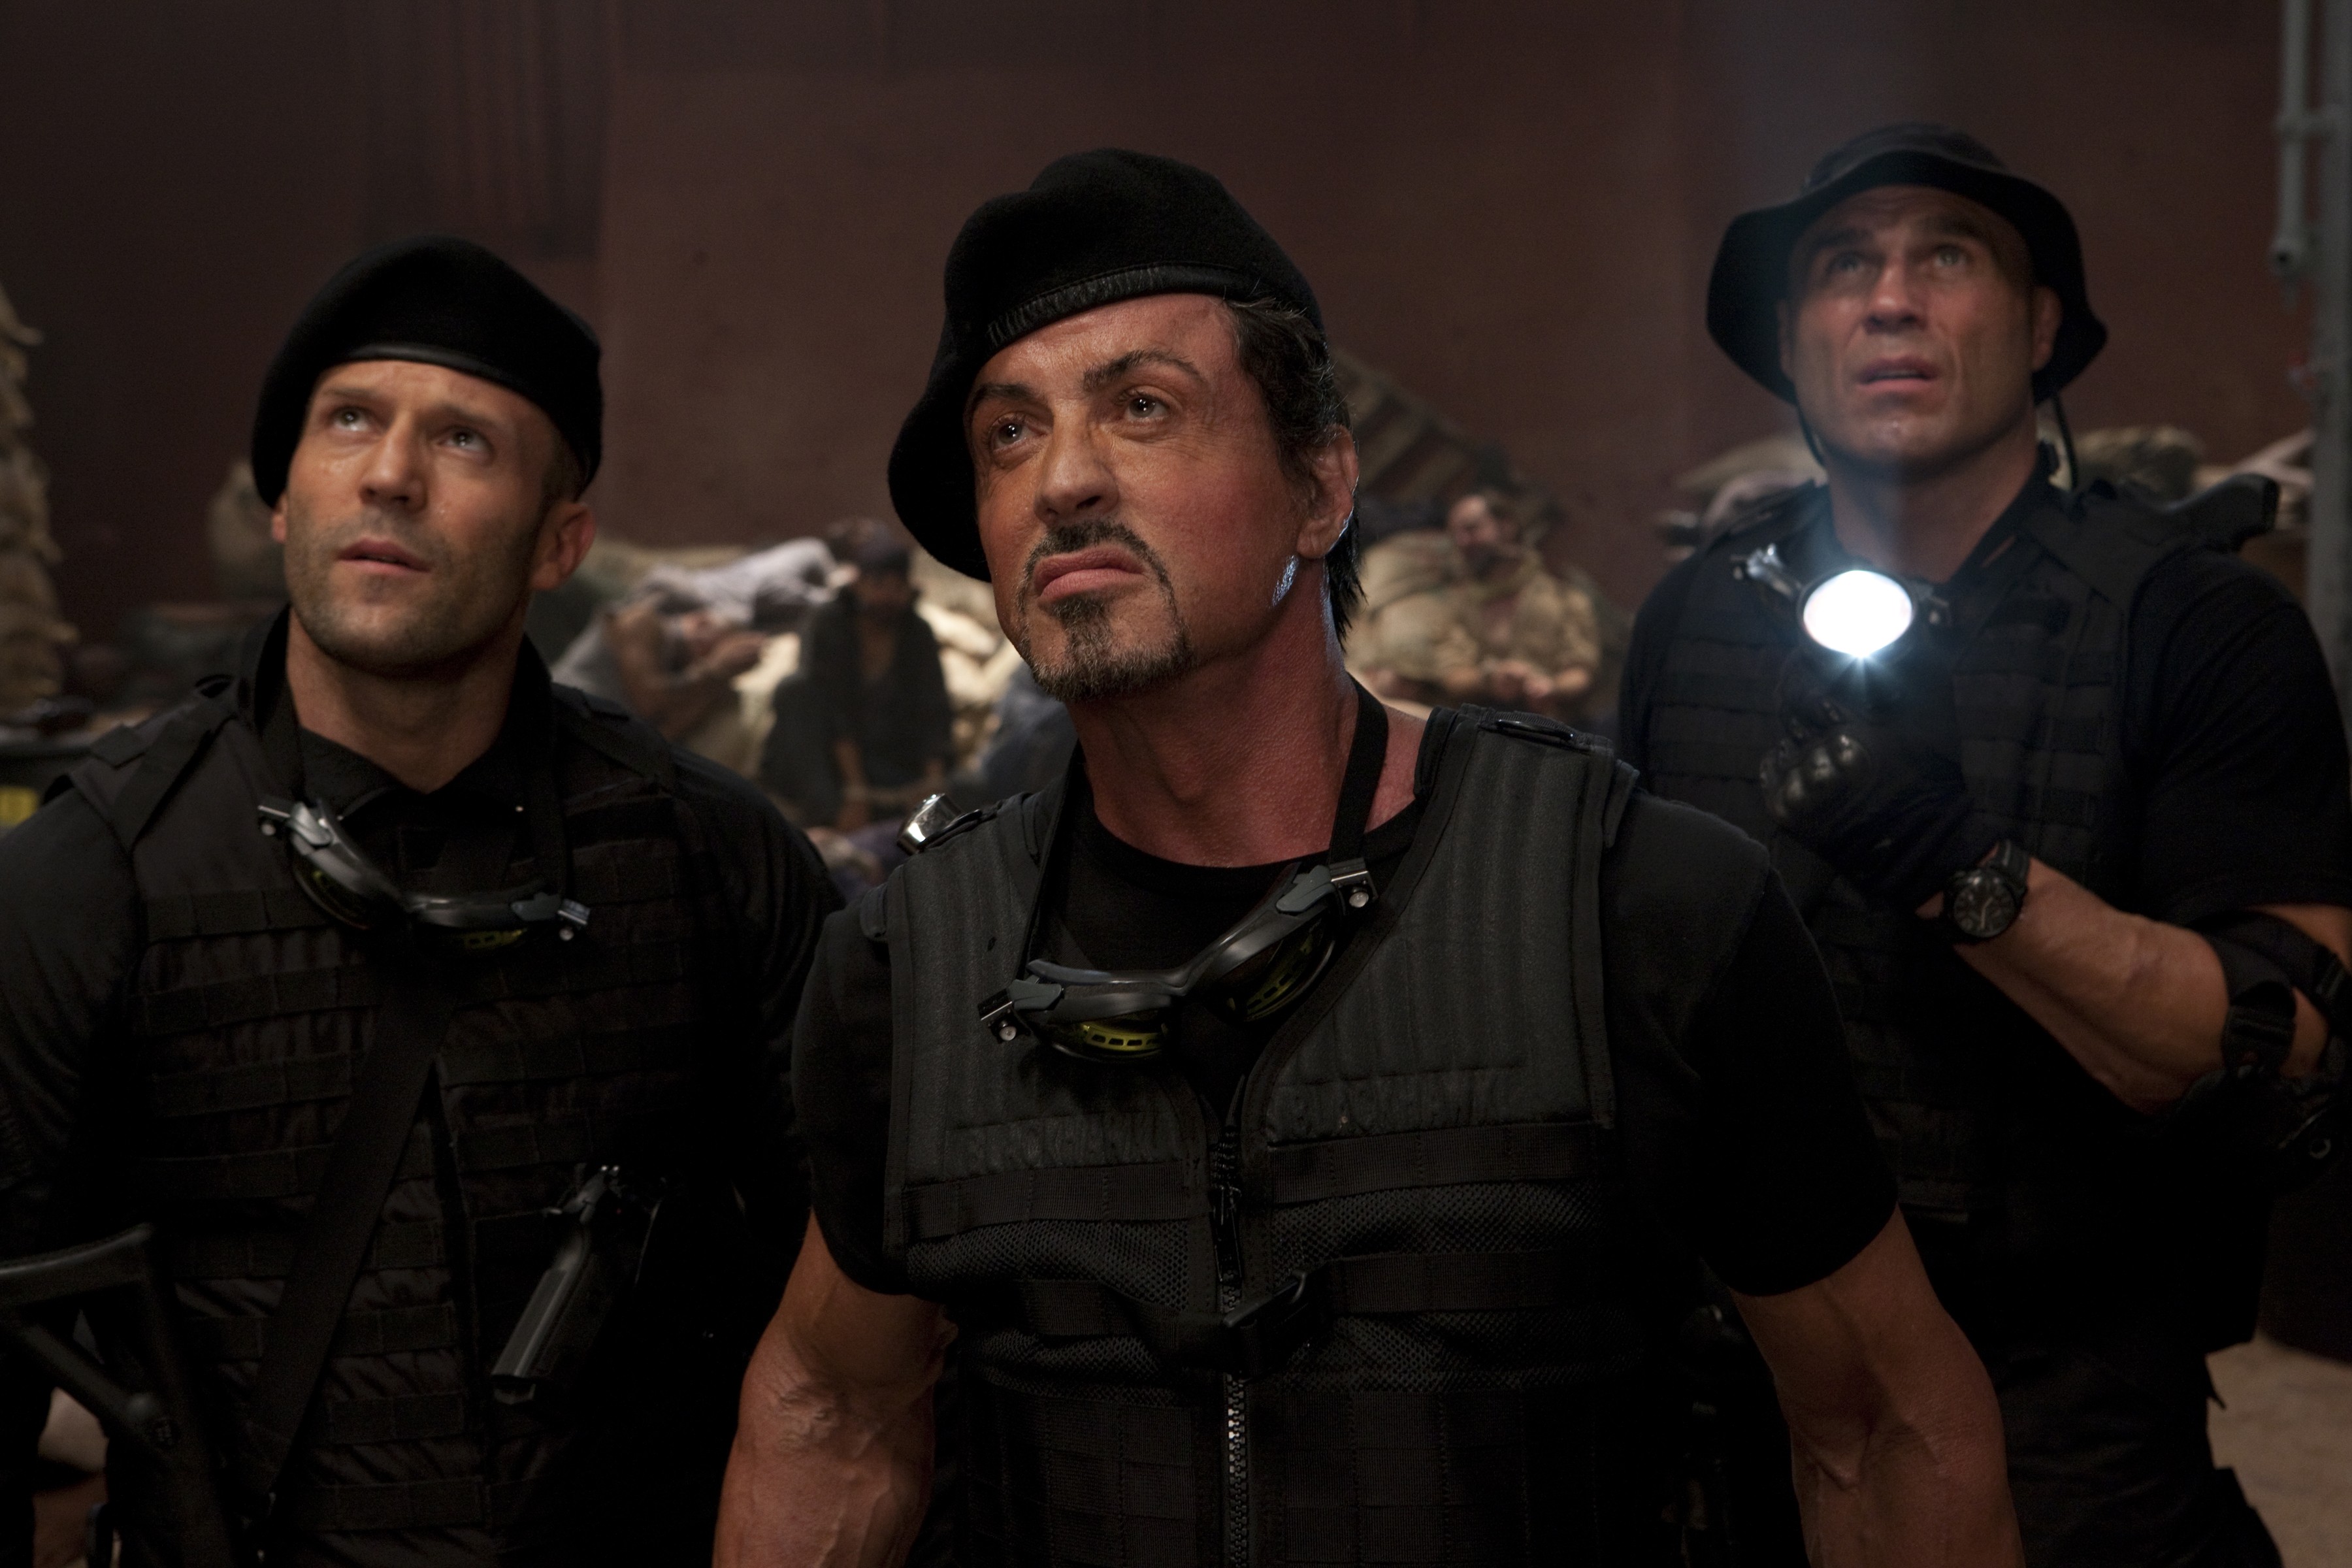 The Expendables, Dolph Lundgren, UFC, Sylvester Stallone, Randy Couture